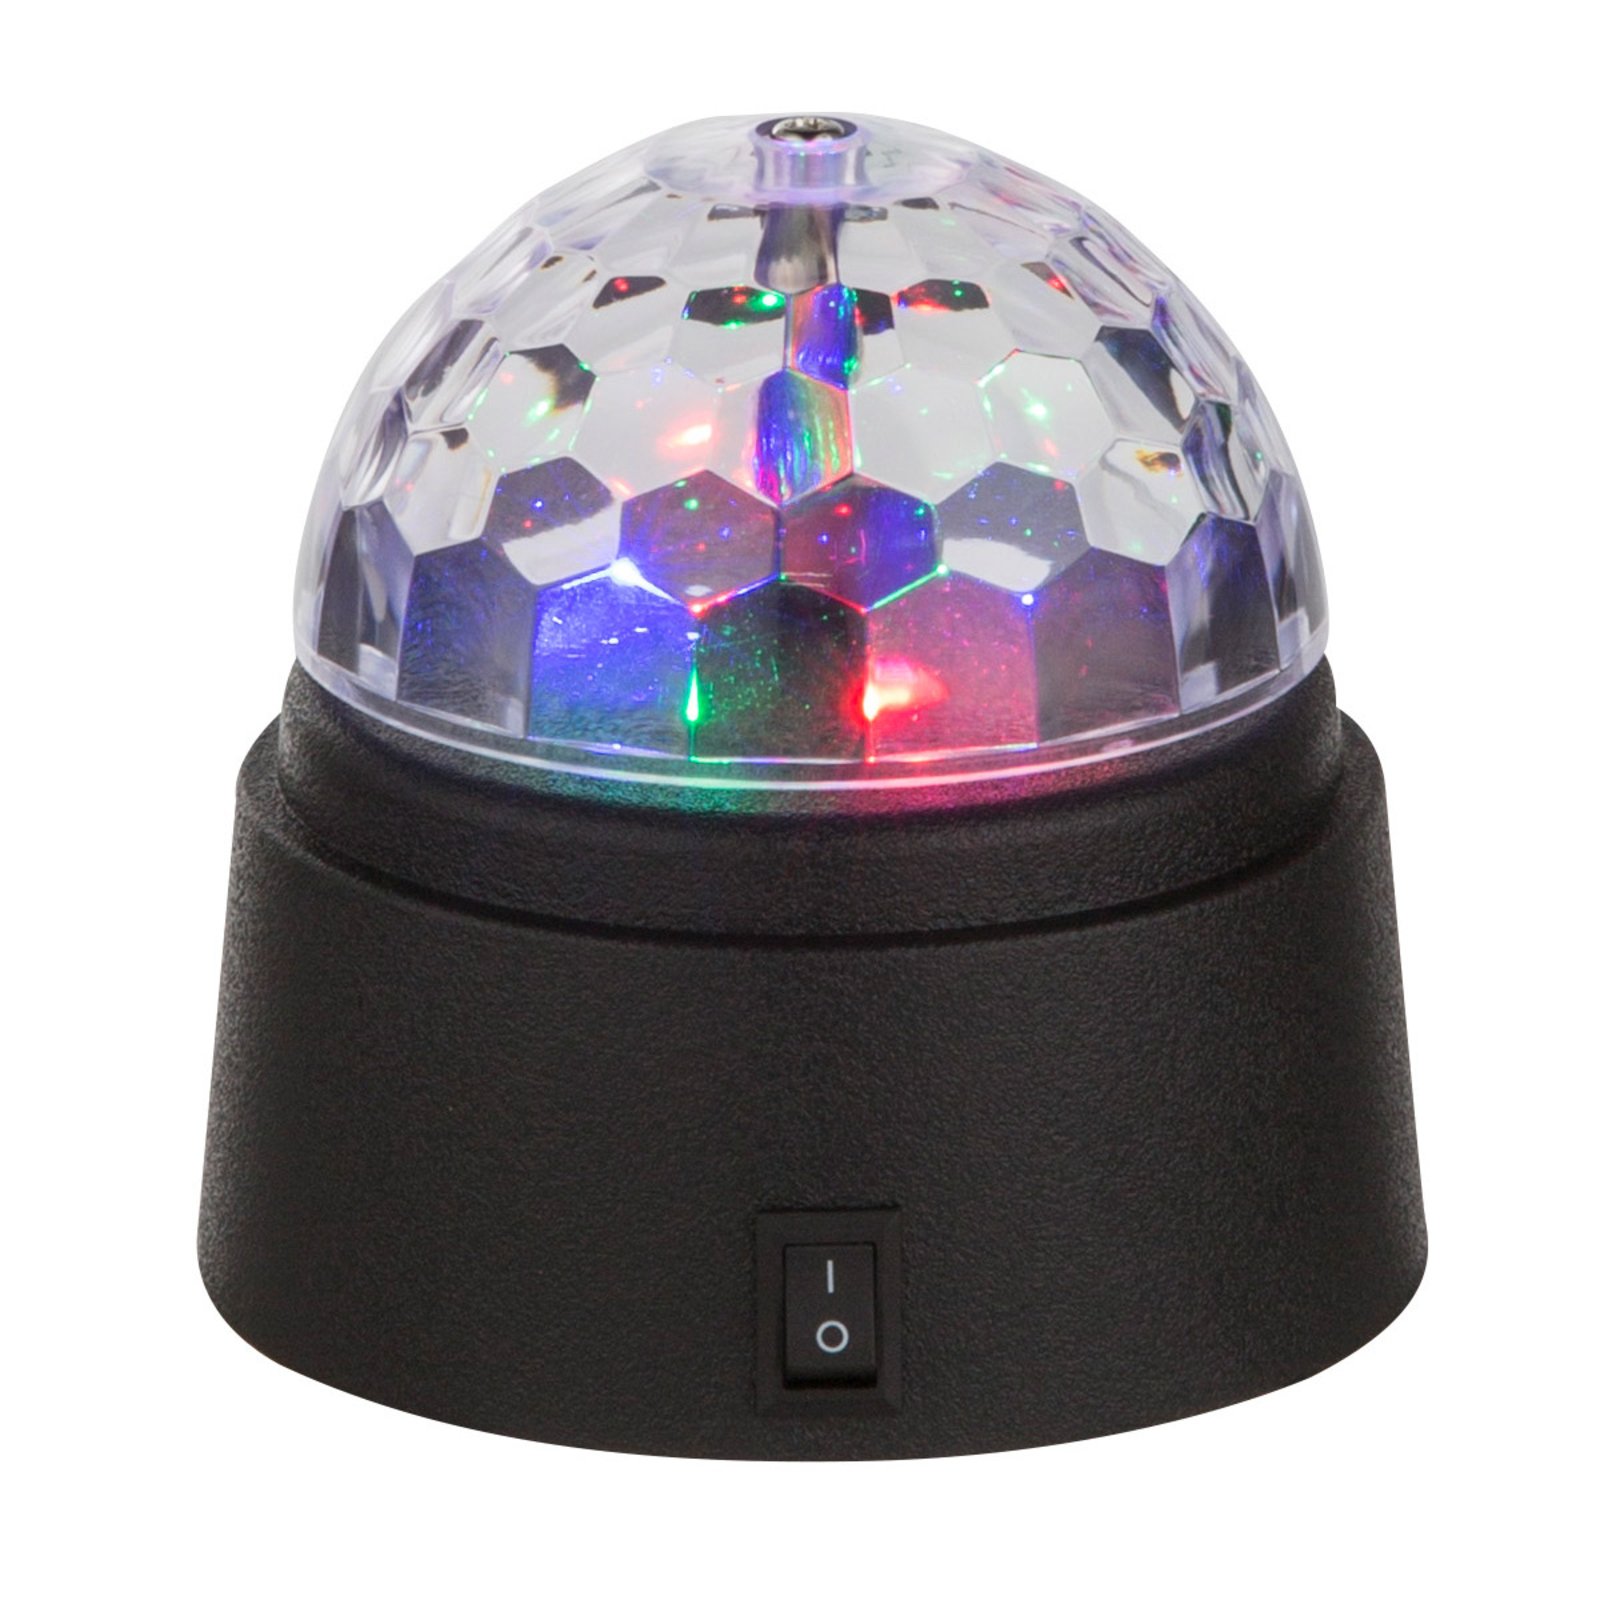 Disco LED table lamp with colourful light